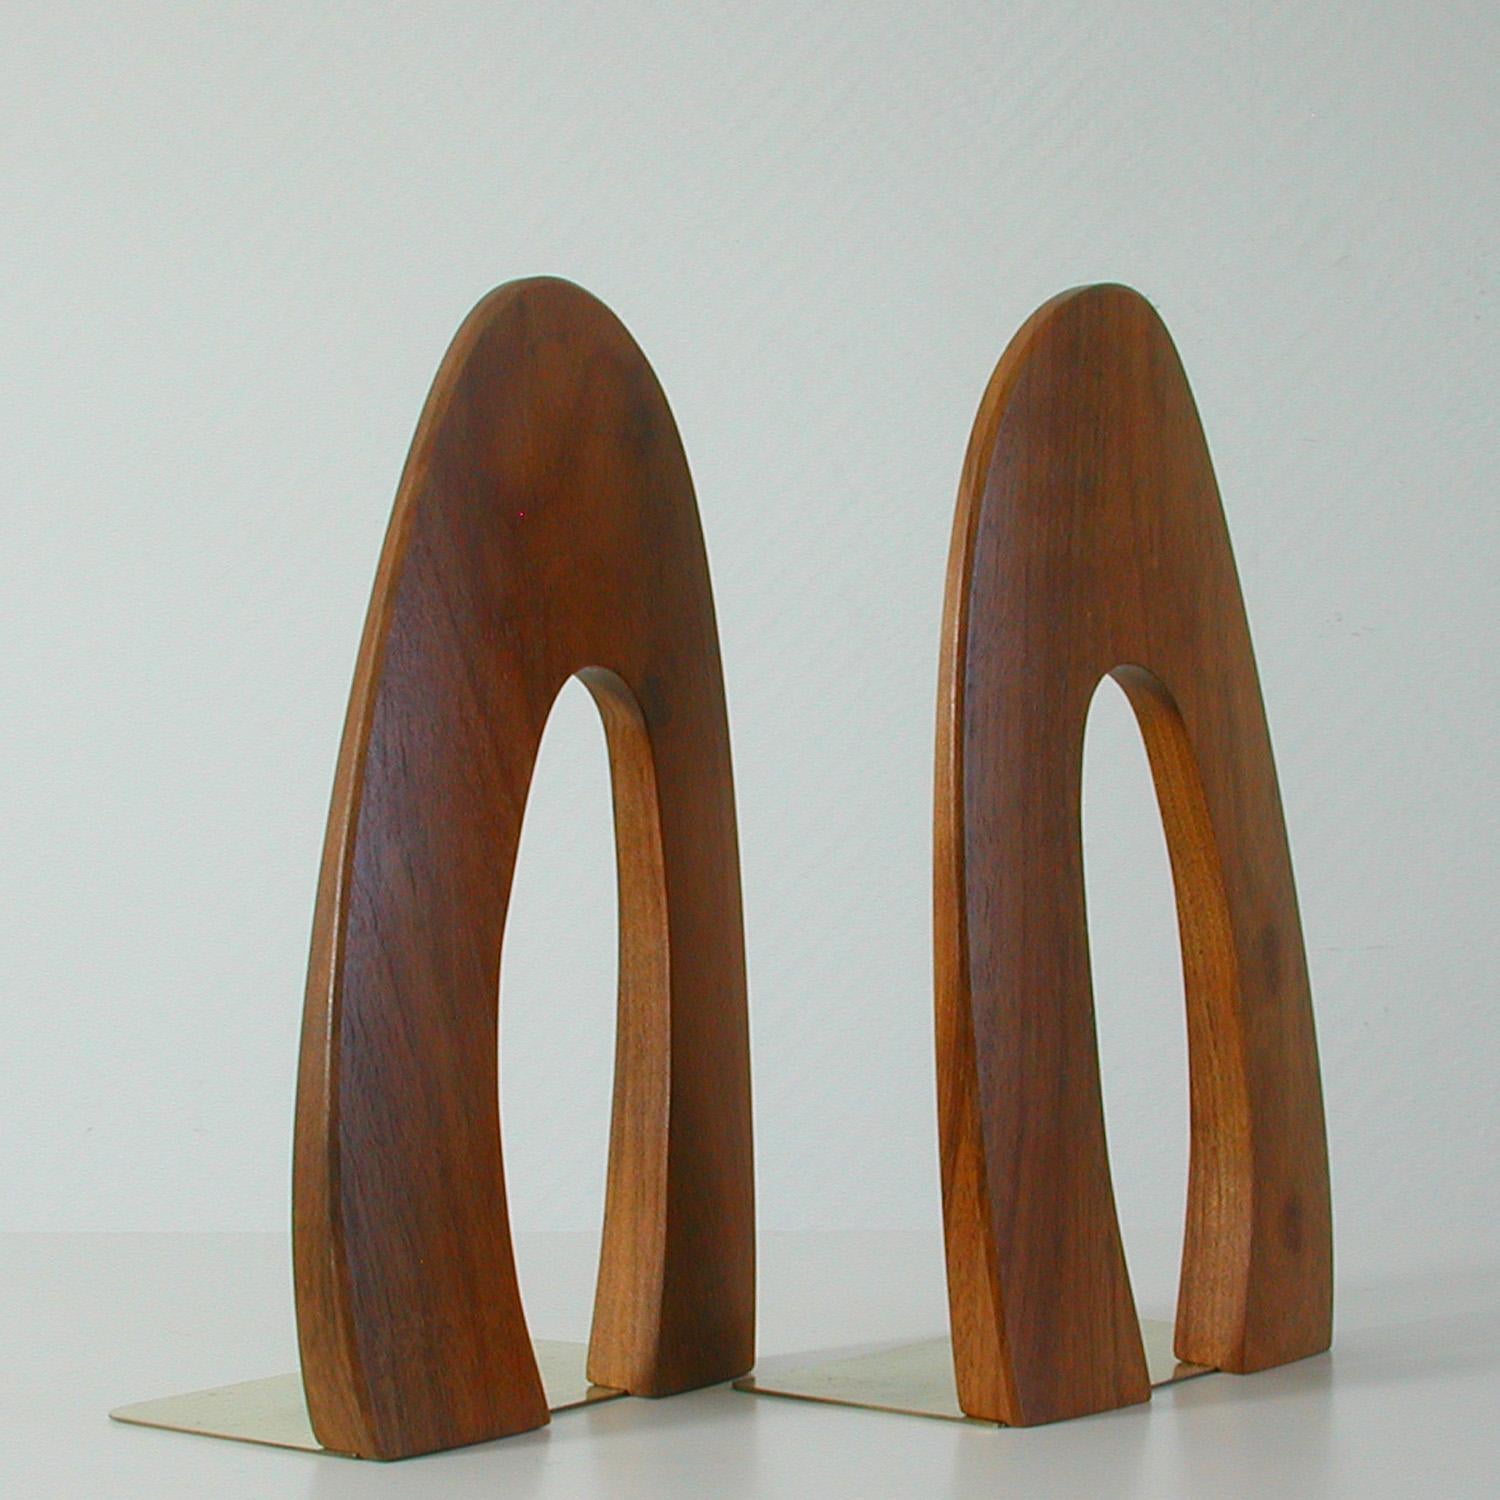 These bookends were made in Sweden in the late 1950s-early 1960s. They are made of solid teak and brass and have got an unusual shape.